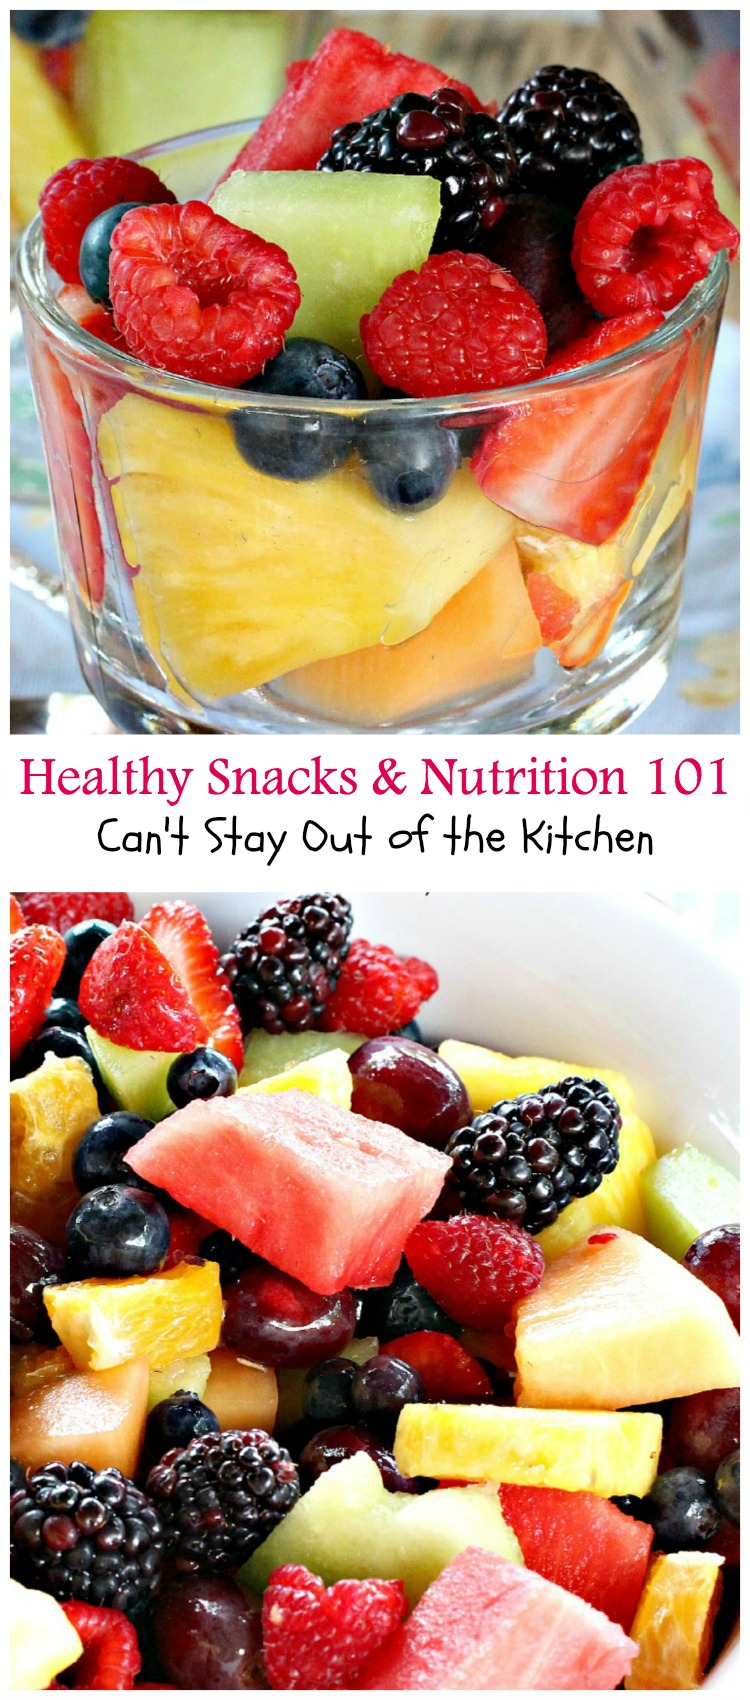 Healthy Snacks & Nutrition 101 | Can't Stay Out of the Kitchen